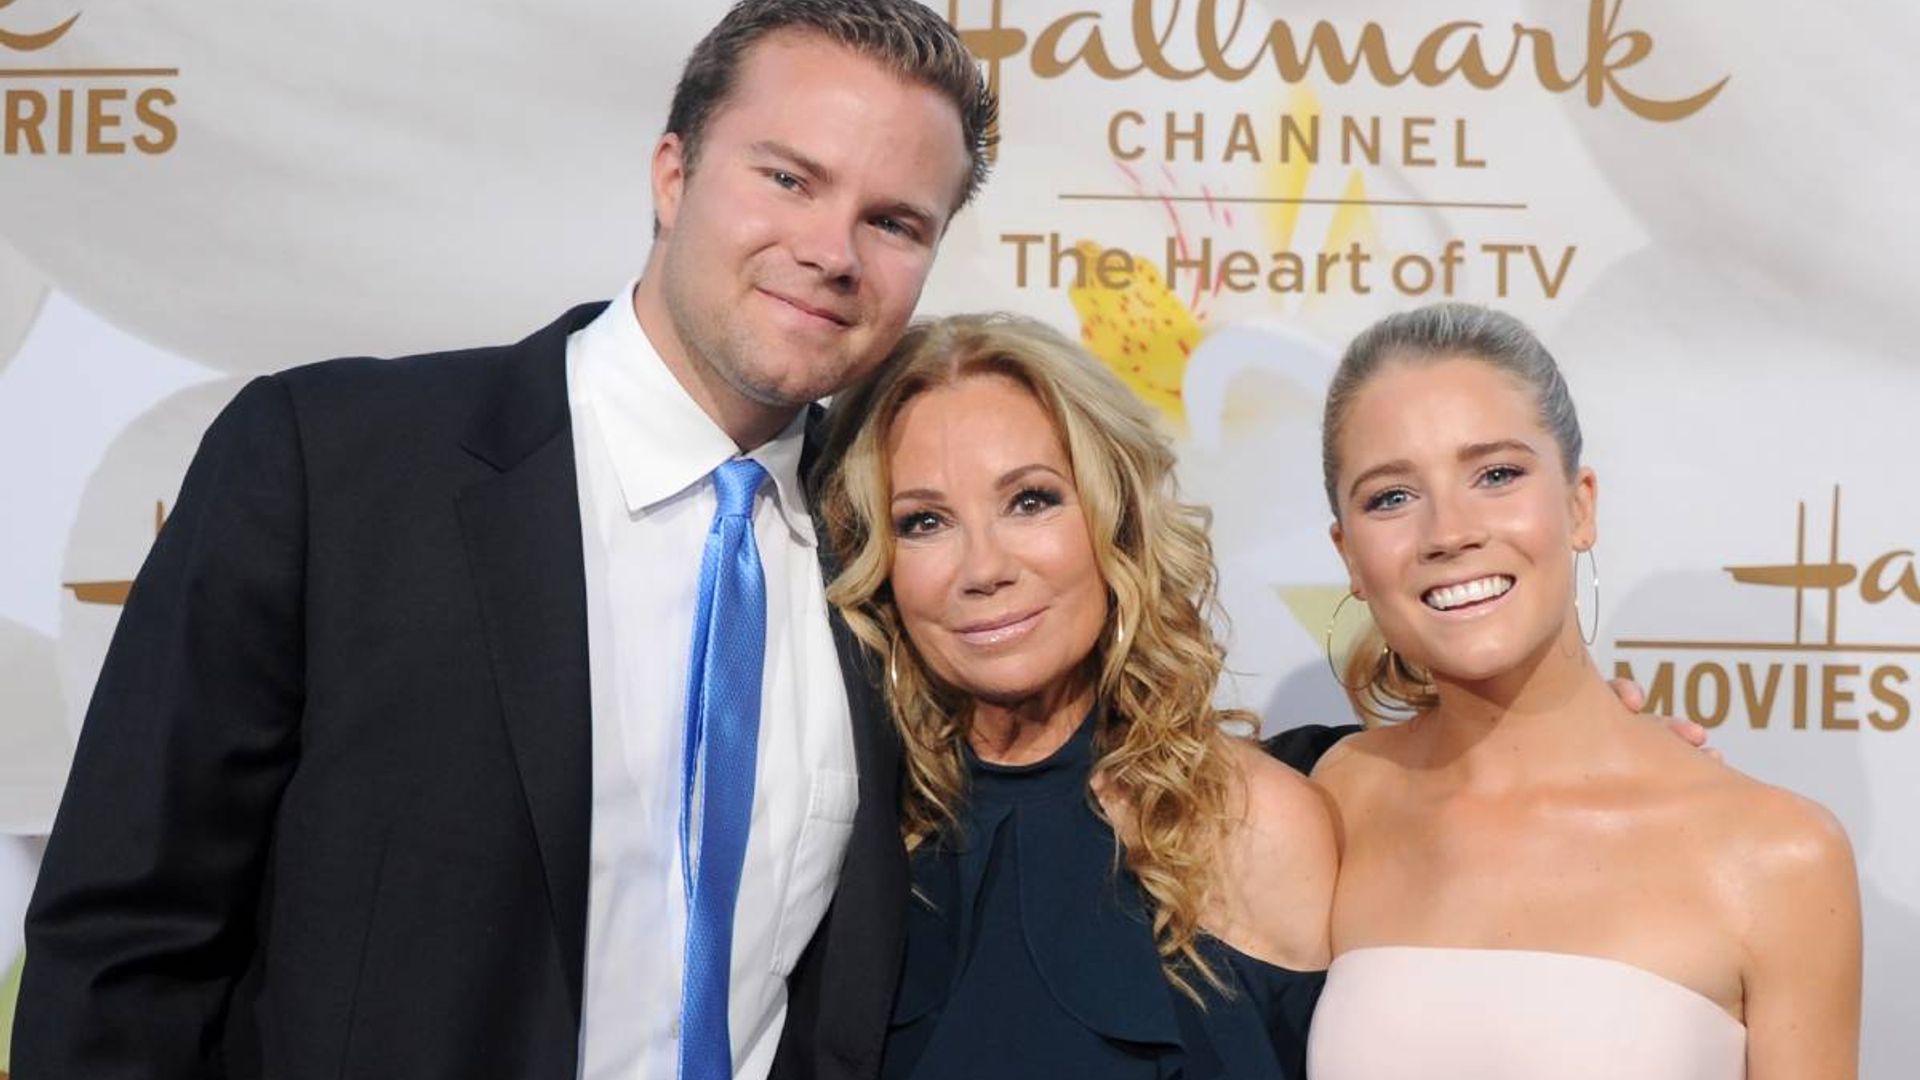 Kathie Lee Gifford makes exciting announcement days after son Cody's wedding